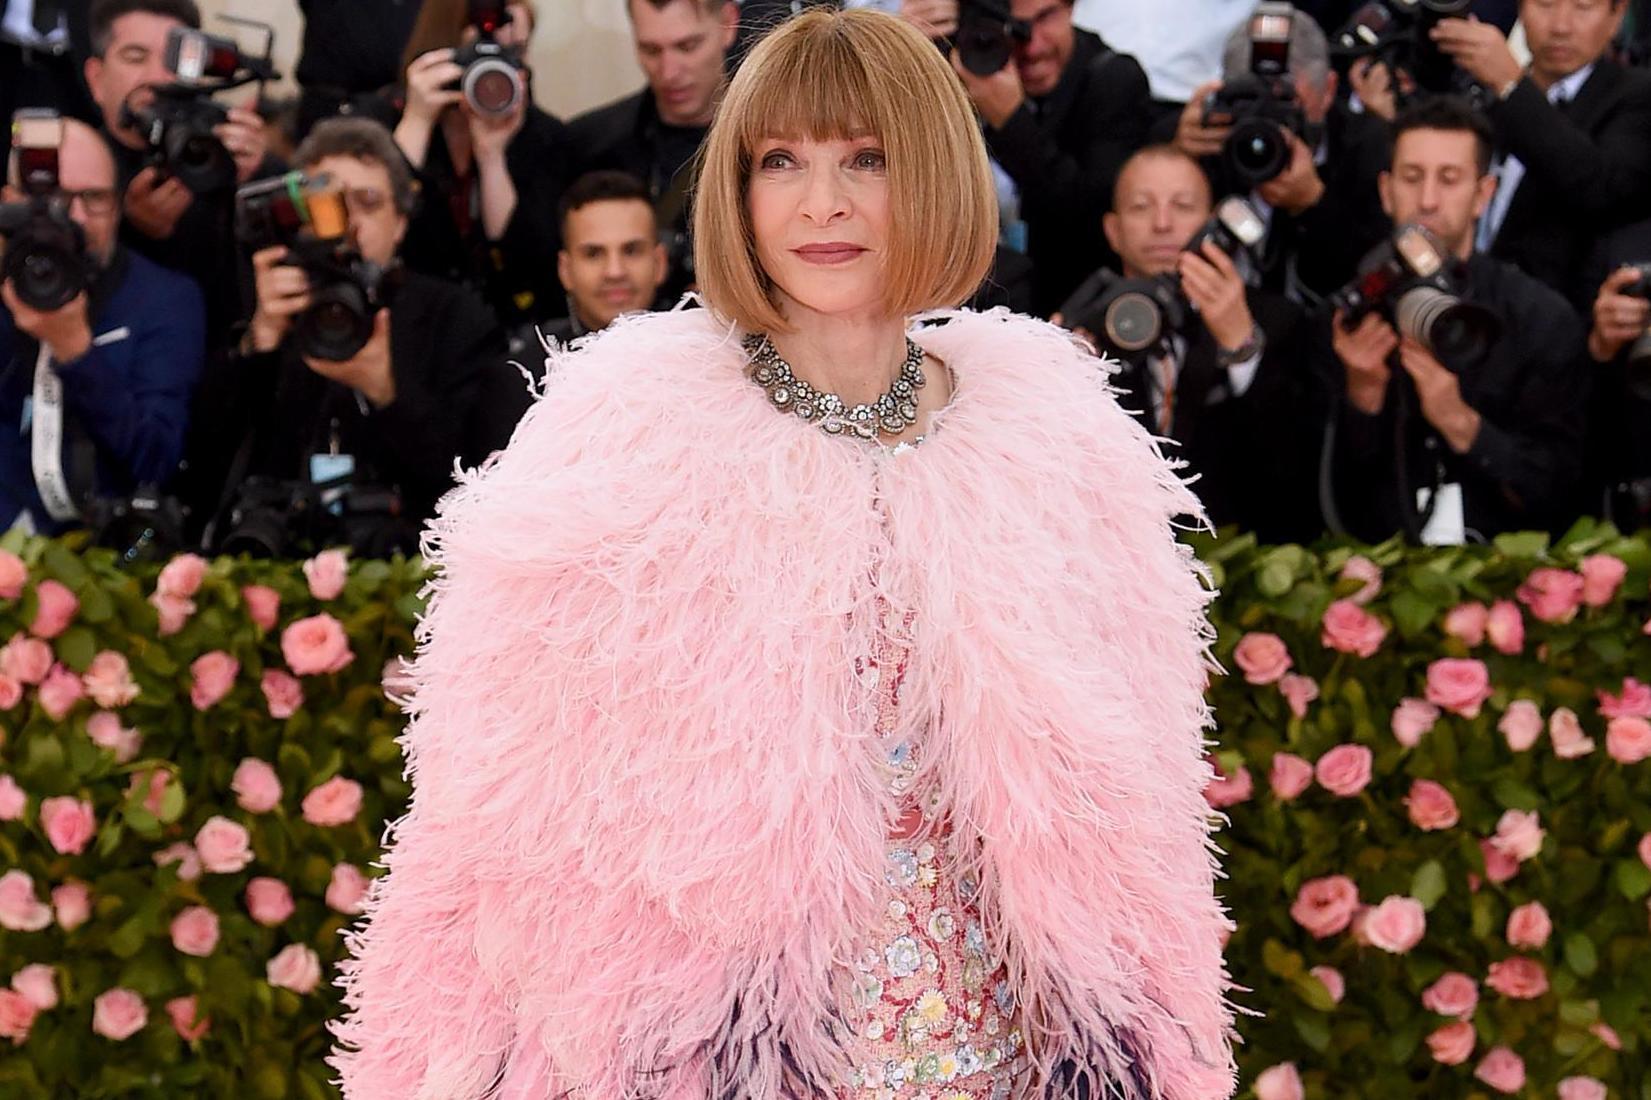 Anna Wintour reflects on positivity during coronavirus pandemic (Getty)